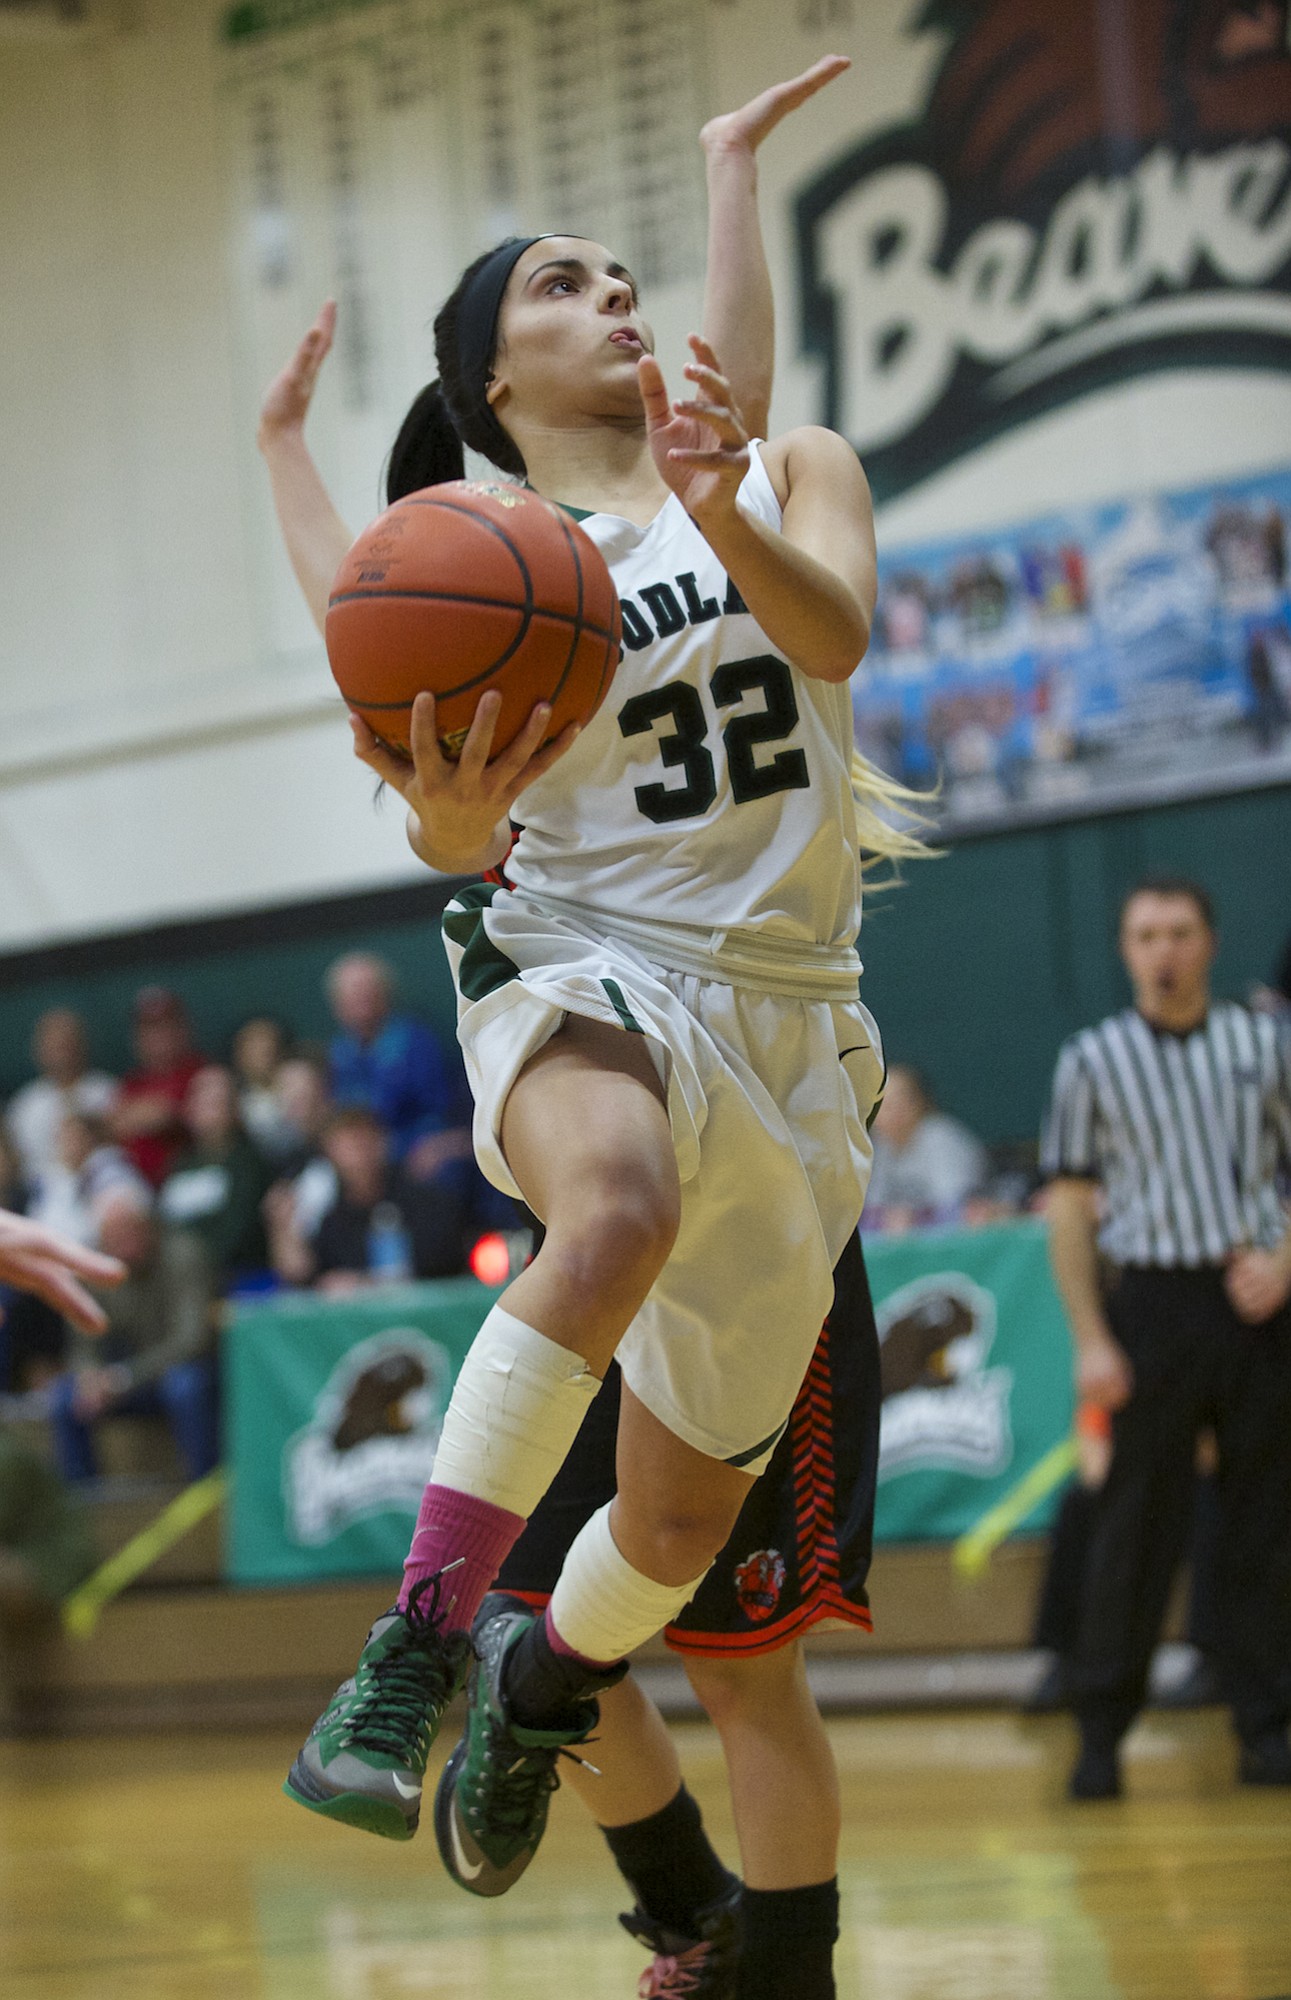 Woodland's Sidra Malik drives to the basket against Centralia in the 2A district playoff game on Friday.